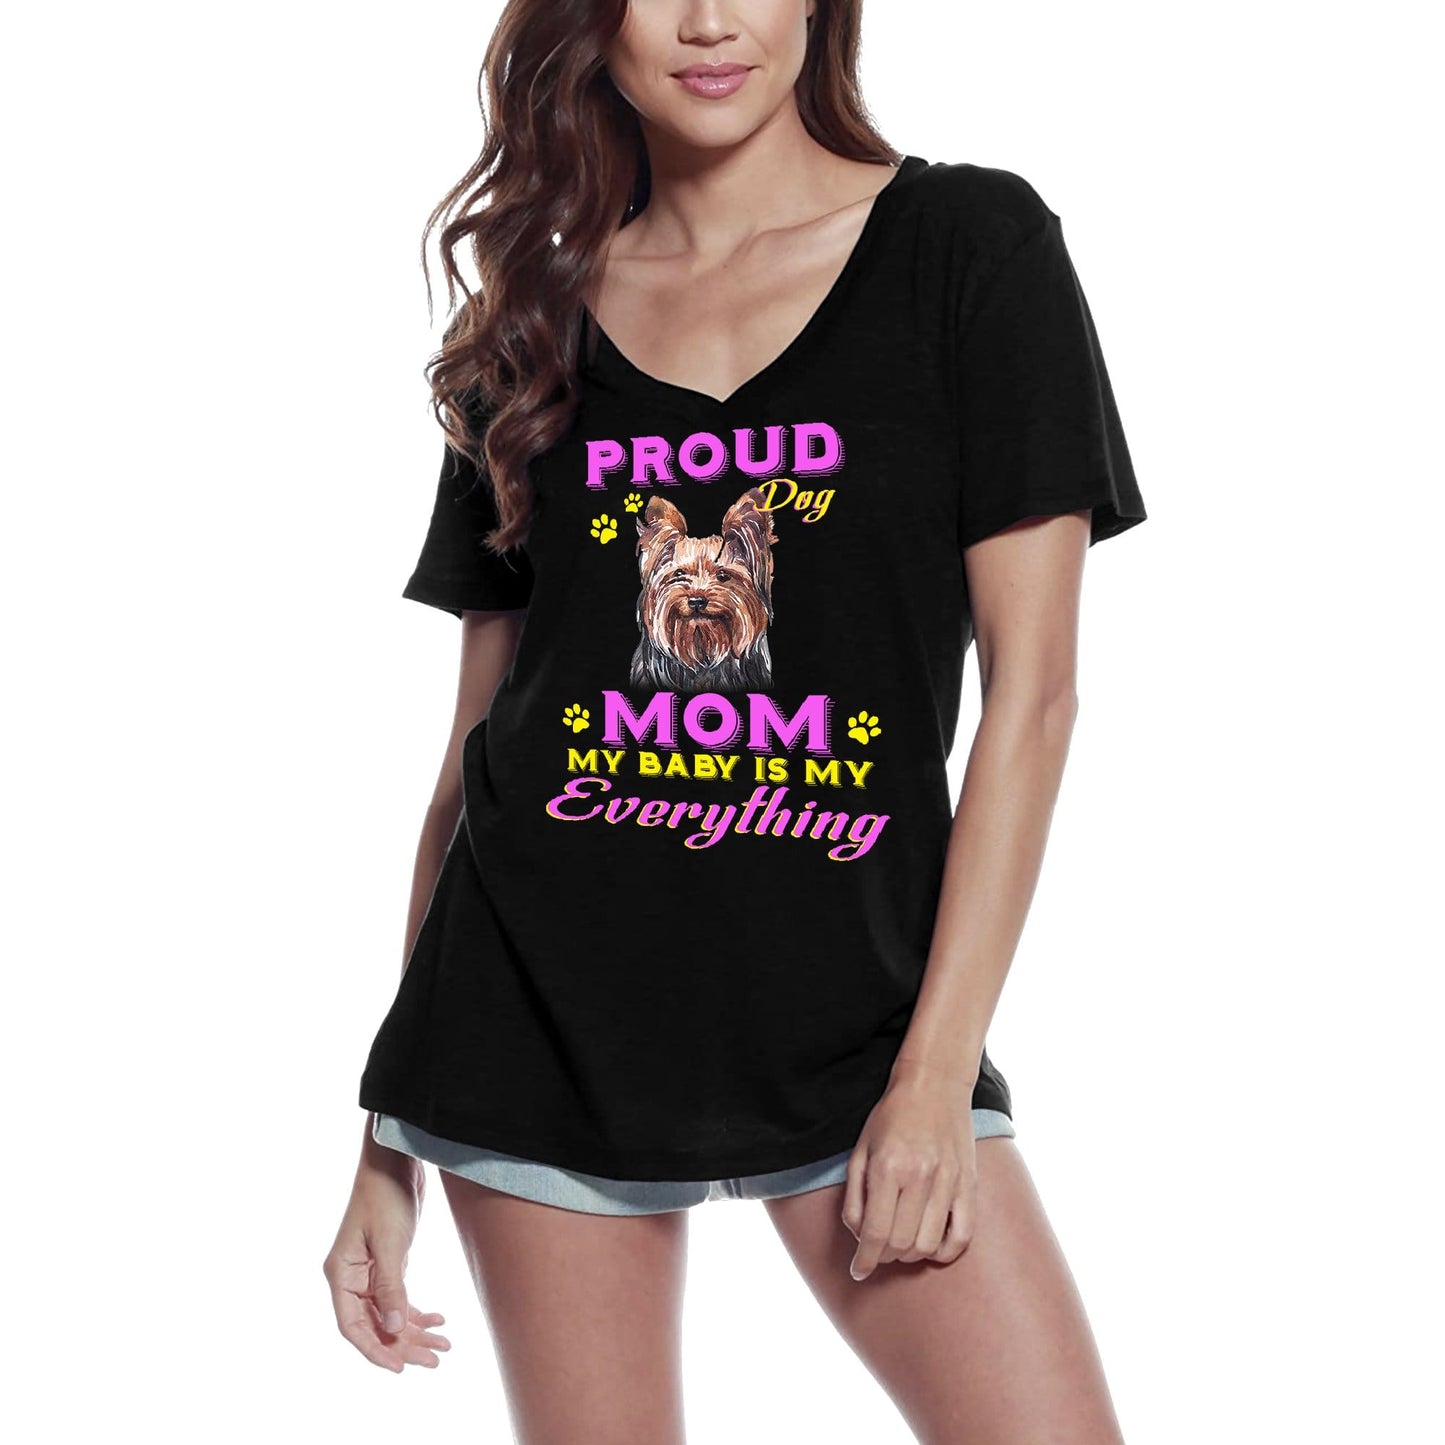 ULTRABASIC Women's T-Shirt Proud Day - Yorkshire Terrier Dog Mom - My Baby is My Everything